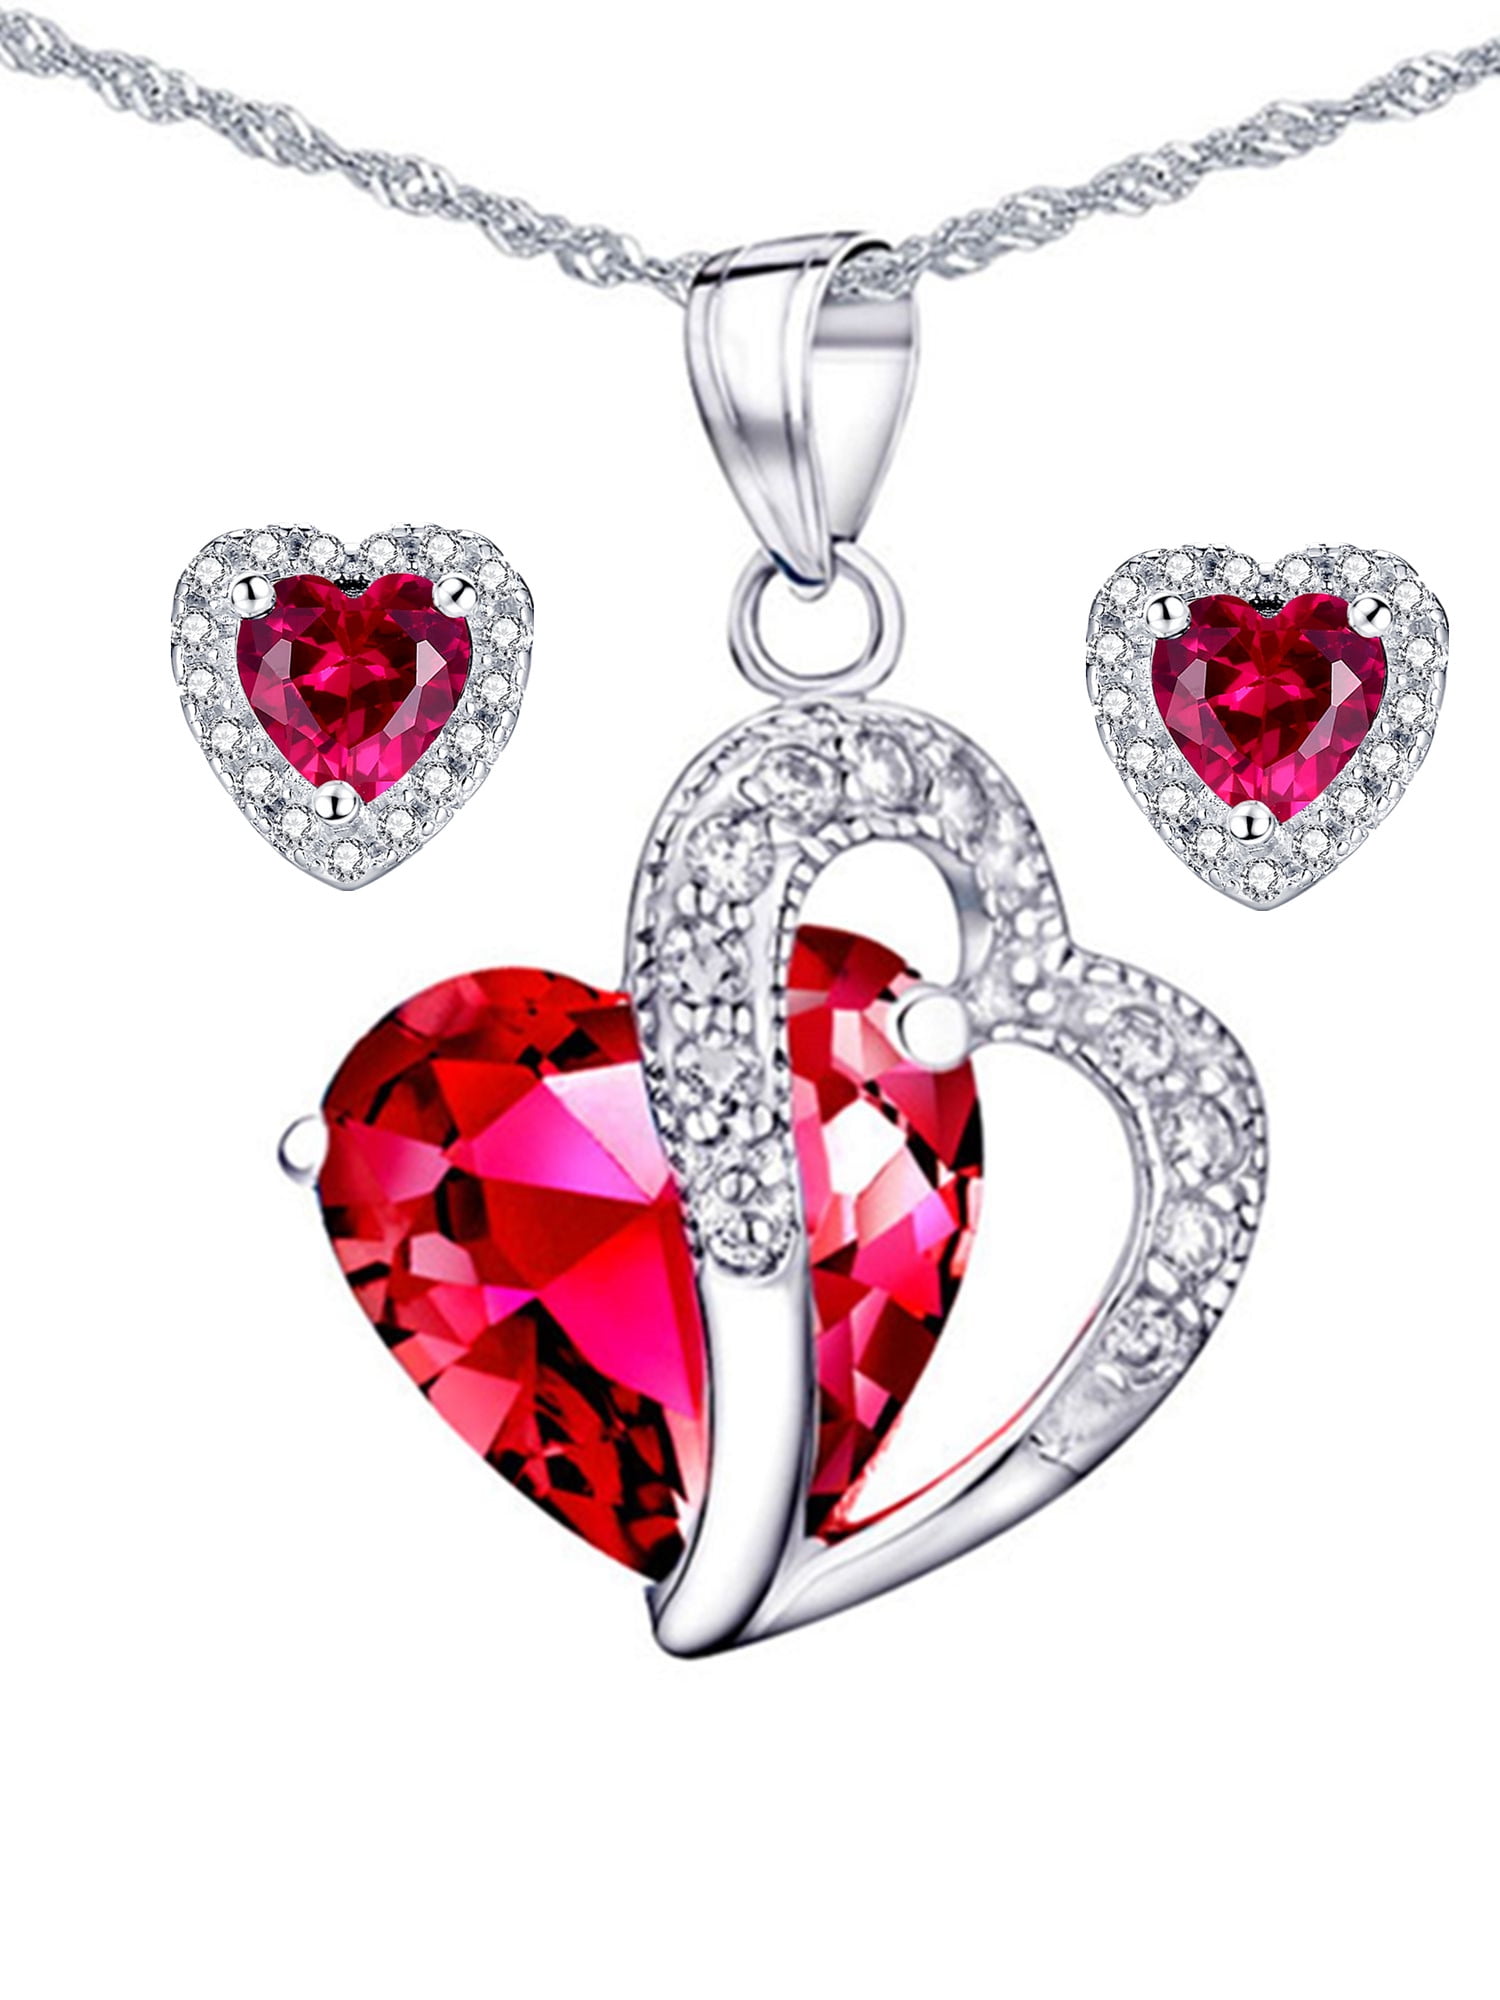 Craft On Jewelry Double Heart Simulated Ruby Pendant Necklace Her 14k Gold Plated